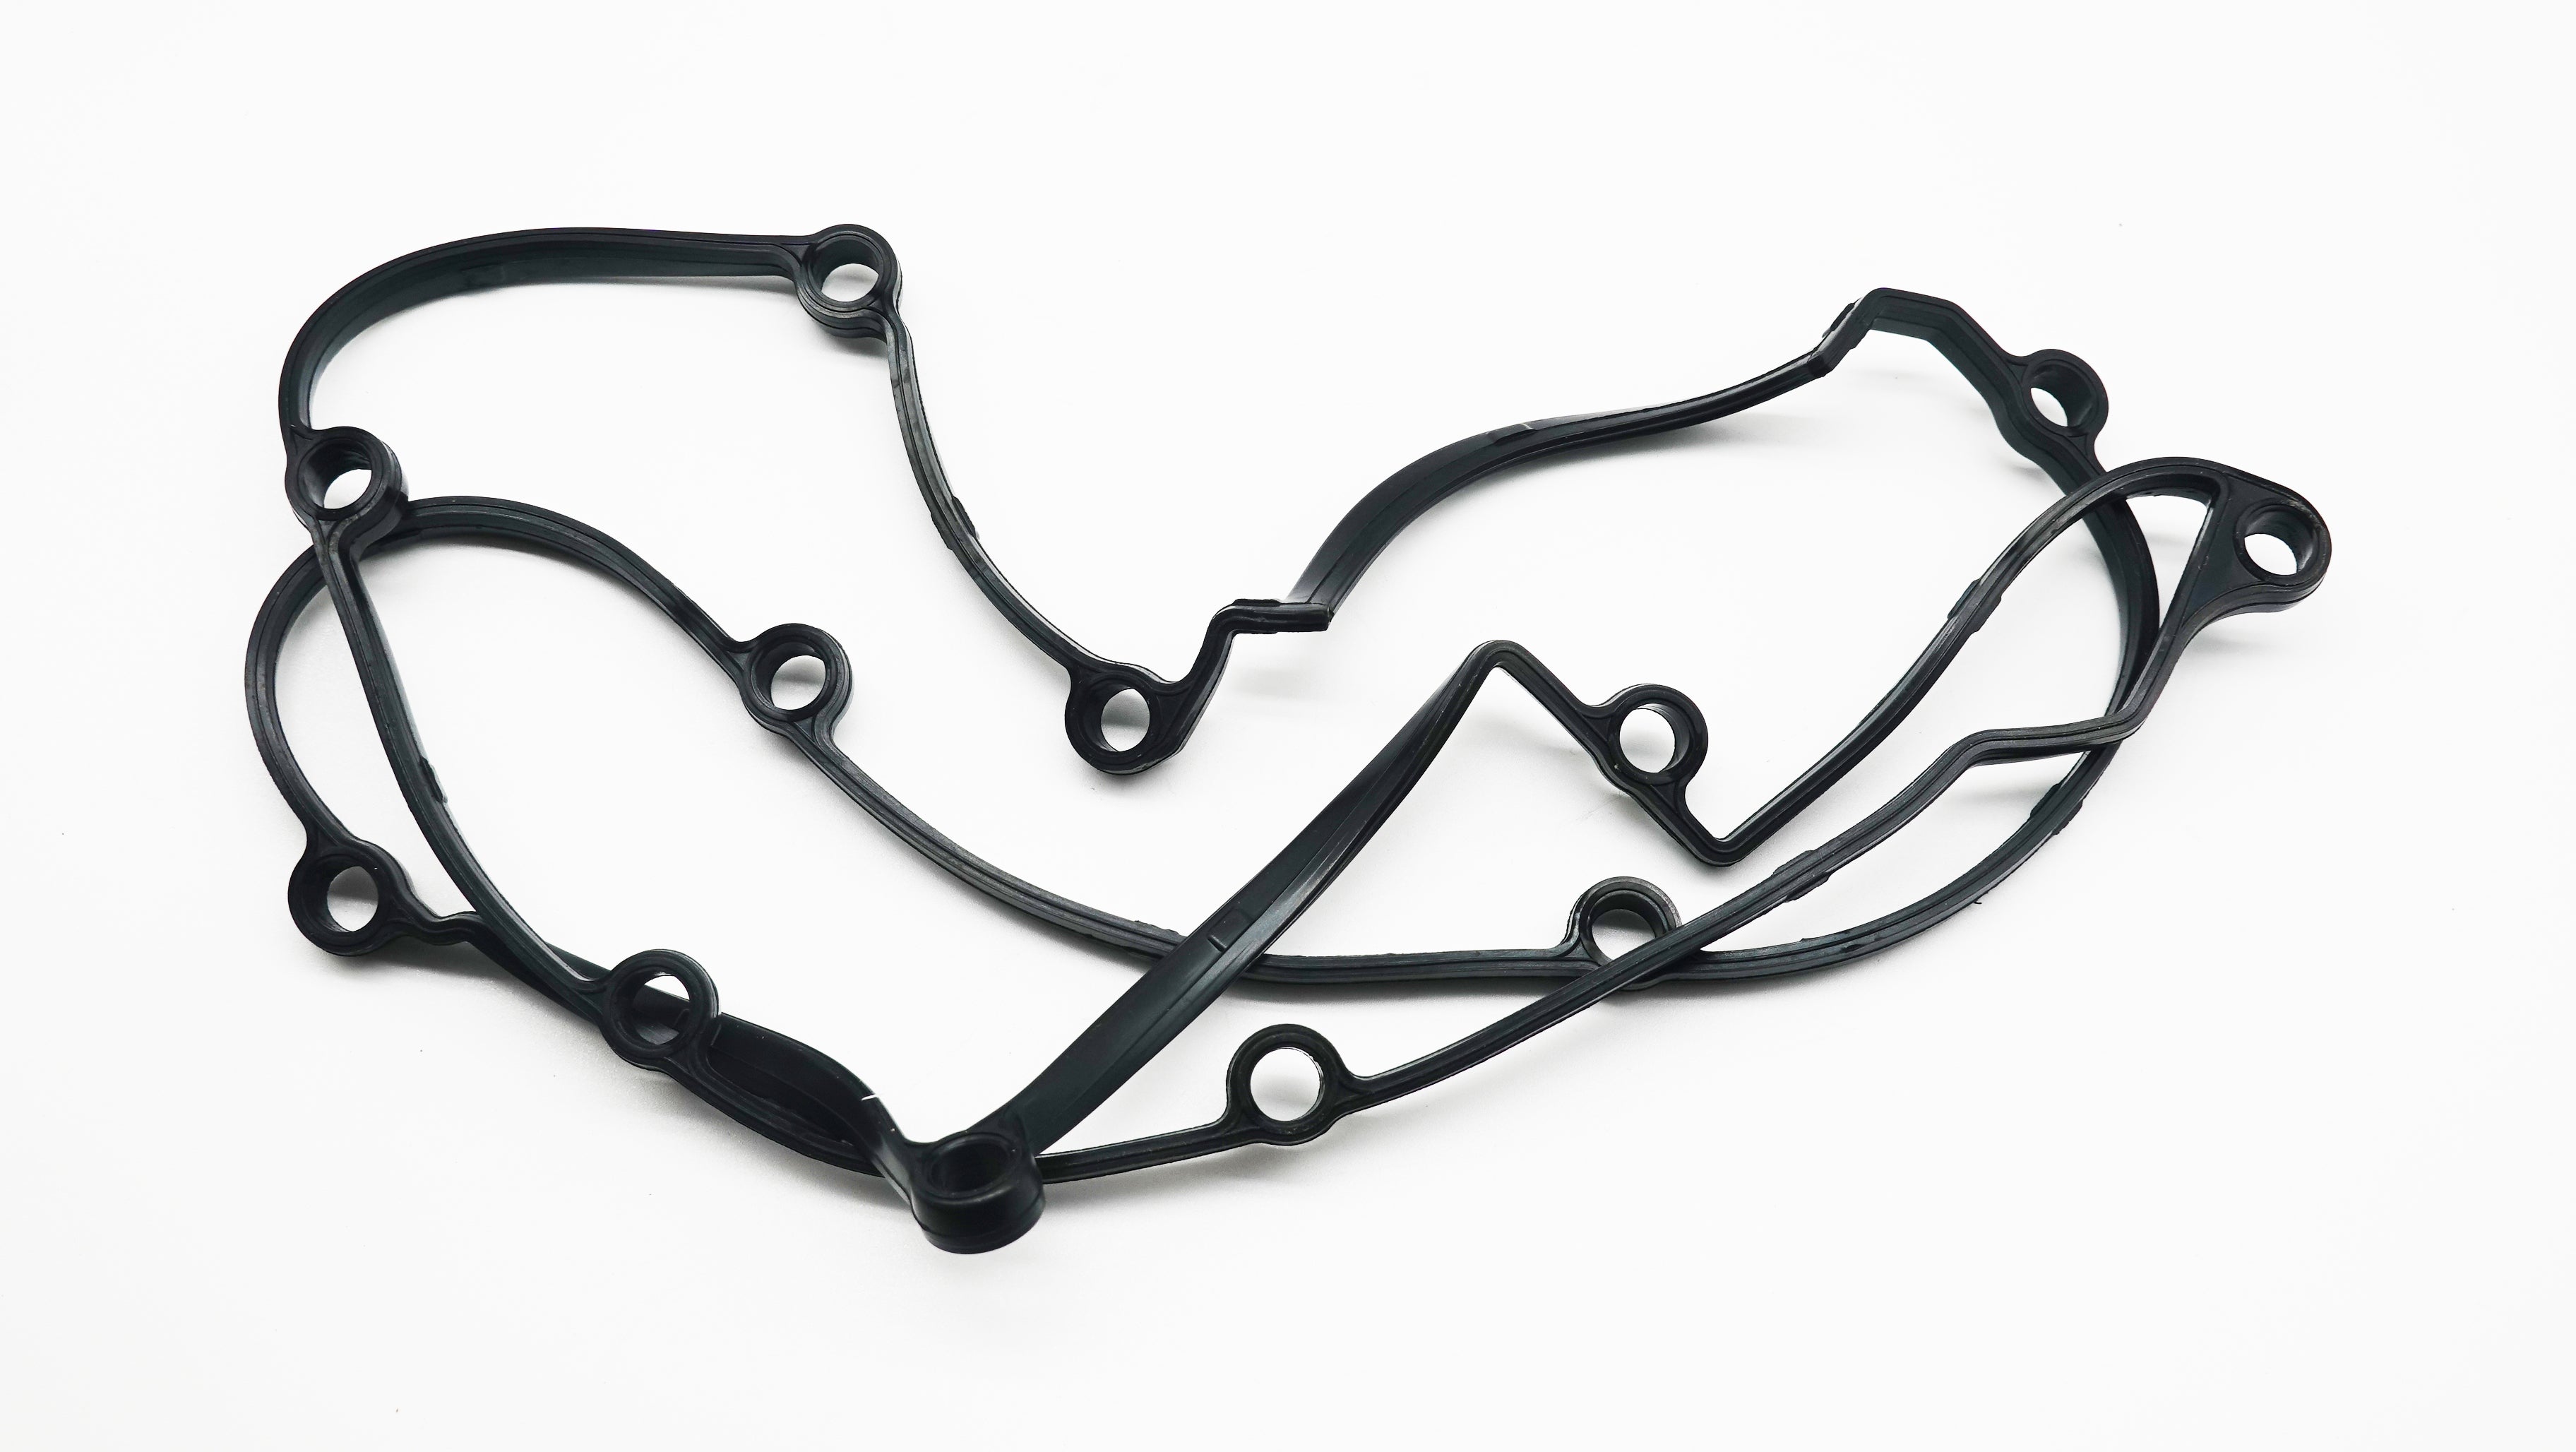 S&T Engine valve cover gasket Hot Deals in African High Quality Engine valve cover gaske for 2003-2021 Hyundai cars